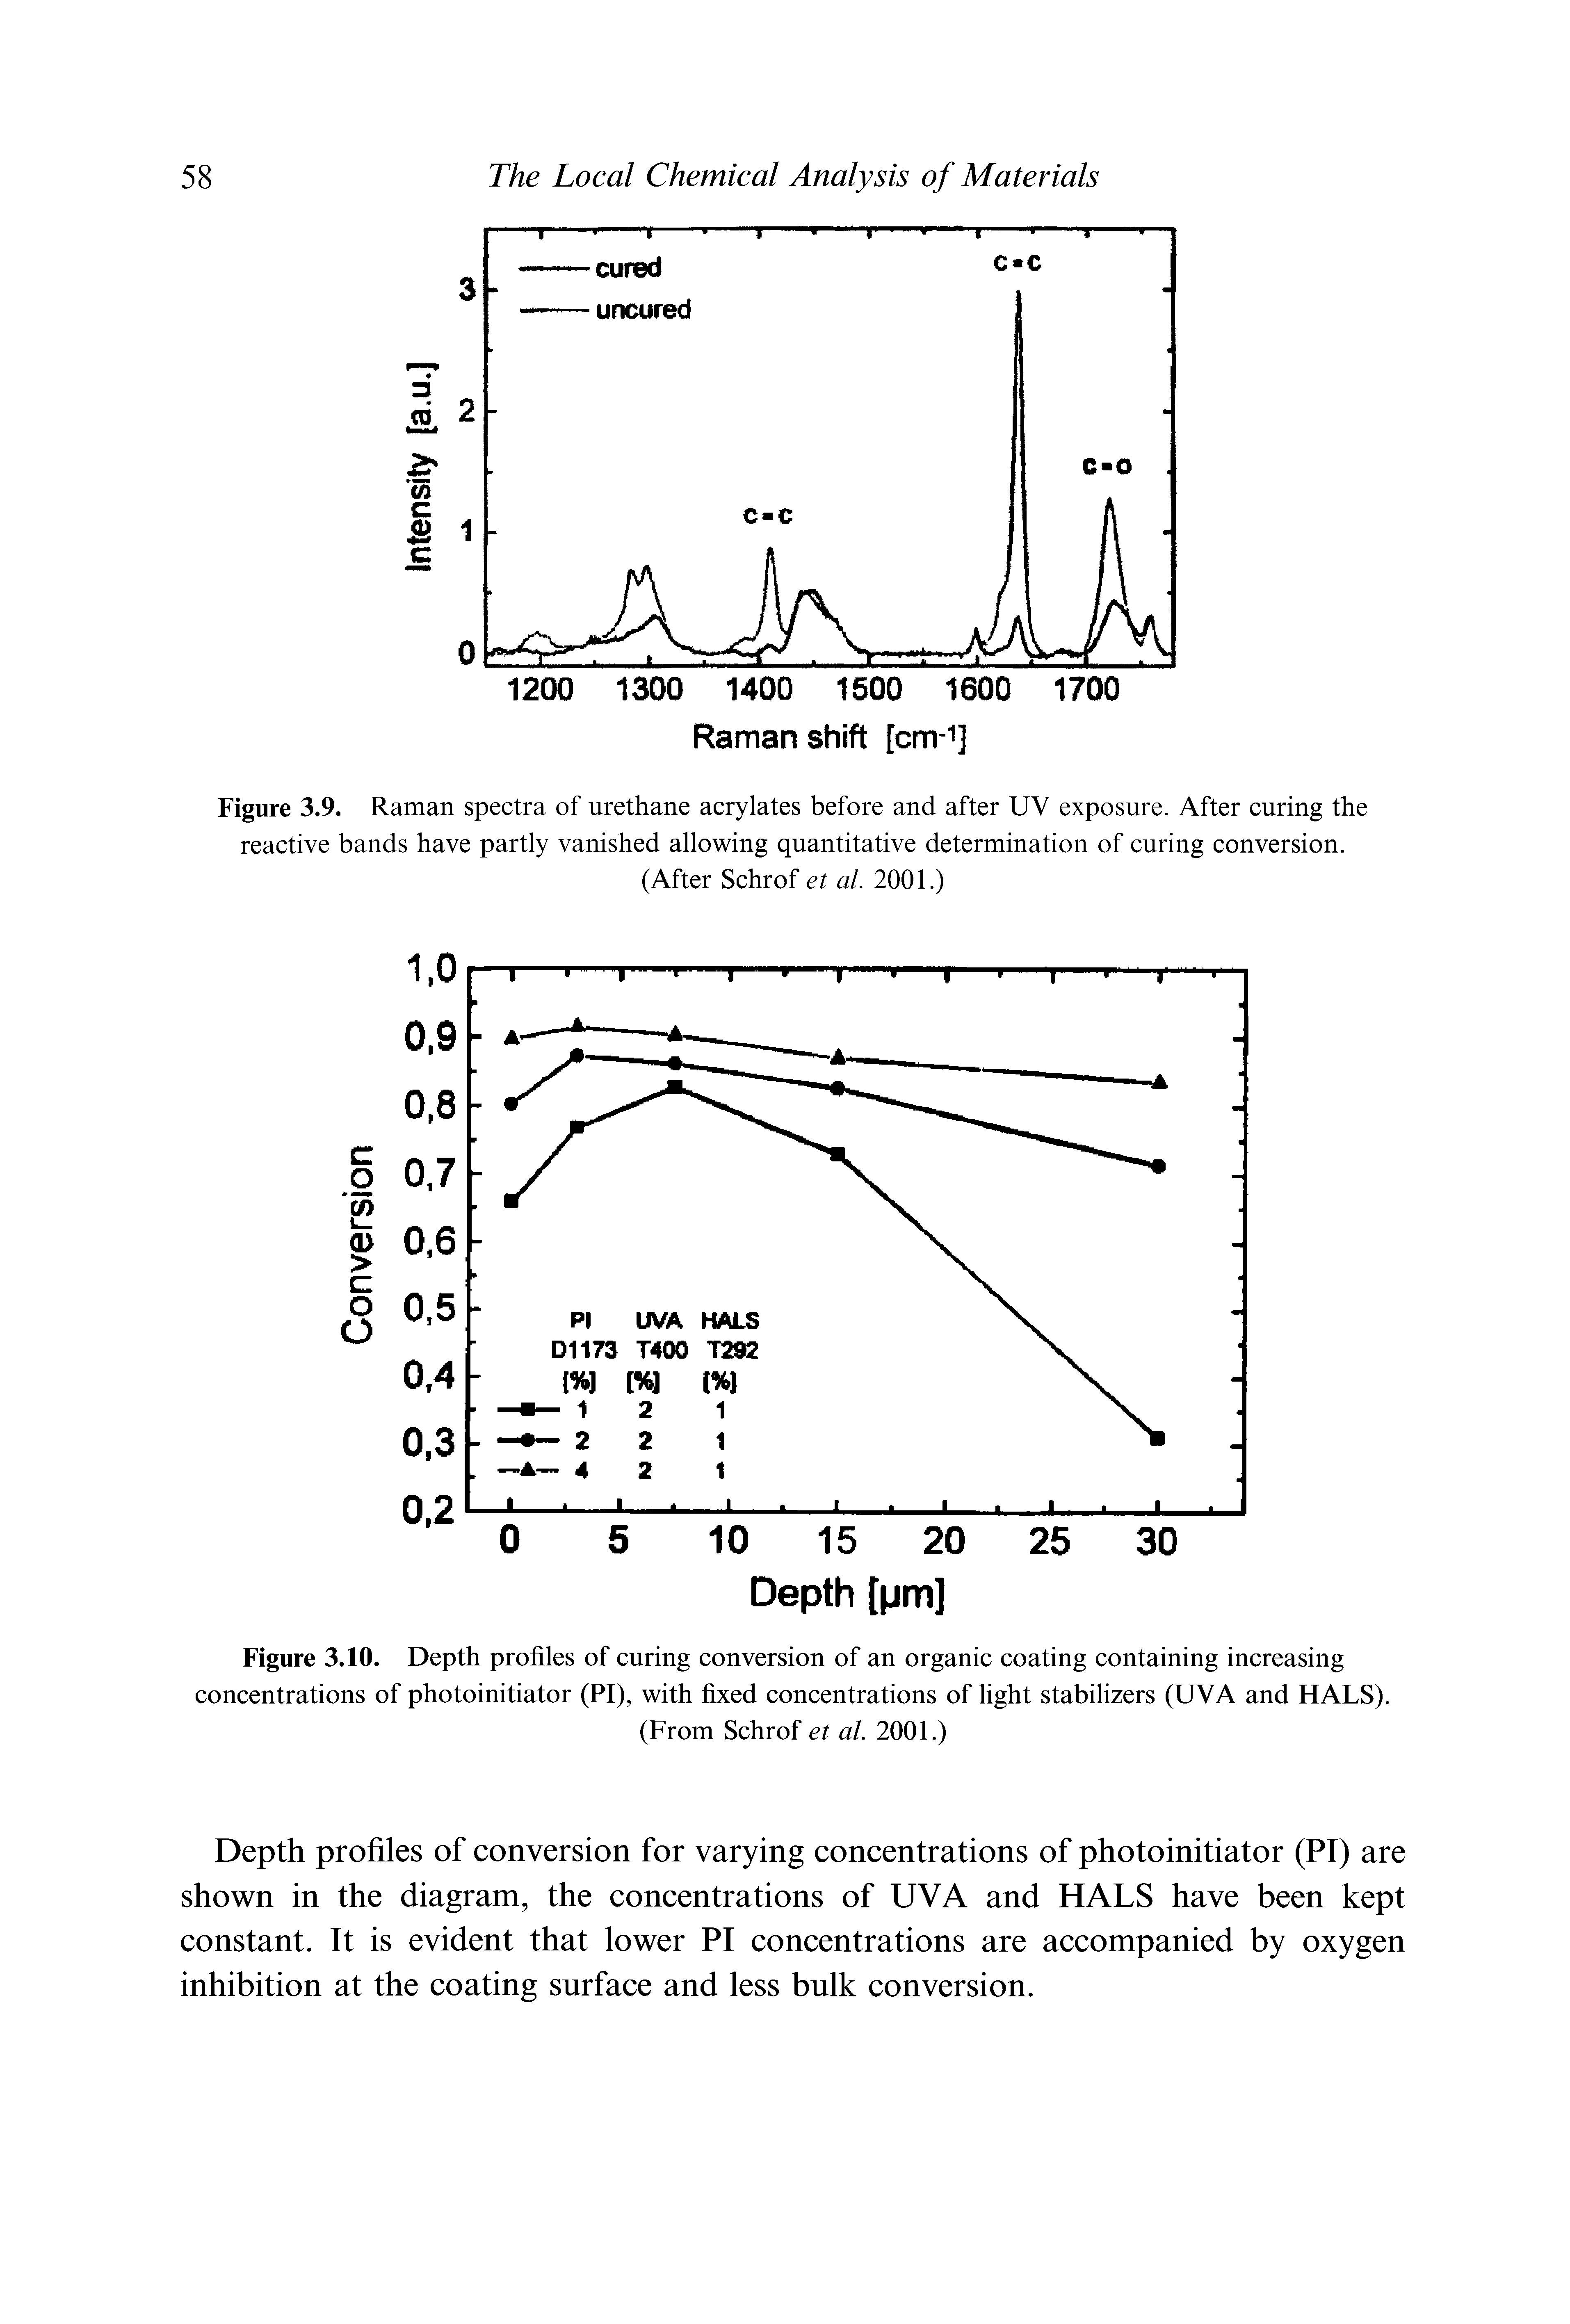 Figure 3.9. Raman spectra of urethane acrylates before and after UV exposure. After curing the reactive bands have partly vanished allowing quantitative determination of curing conversion.